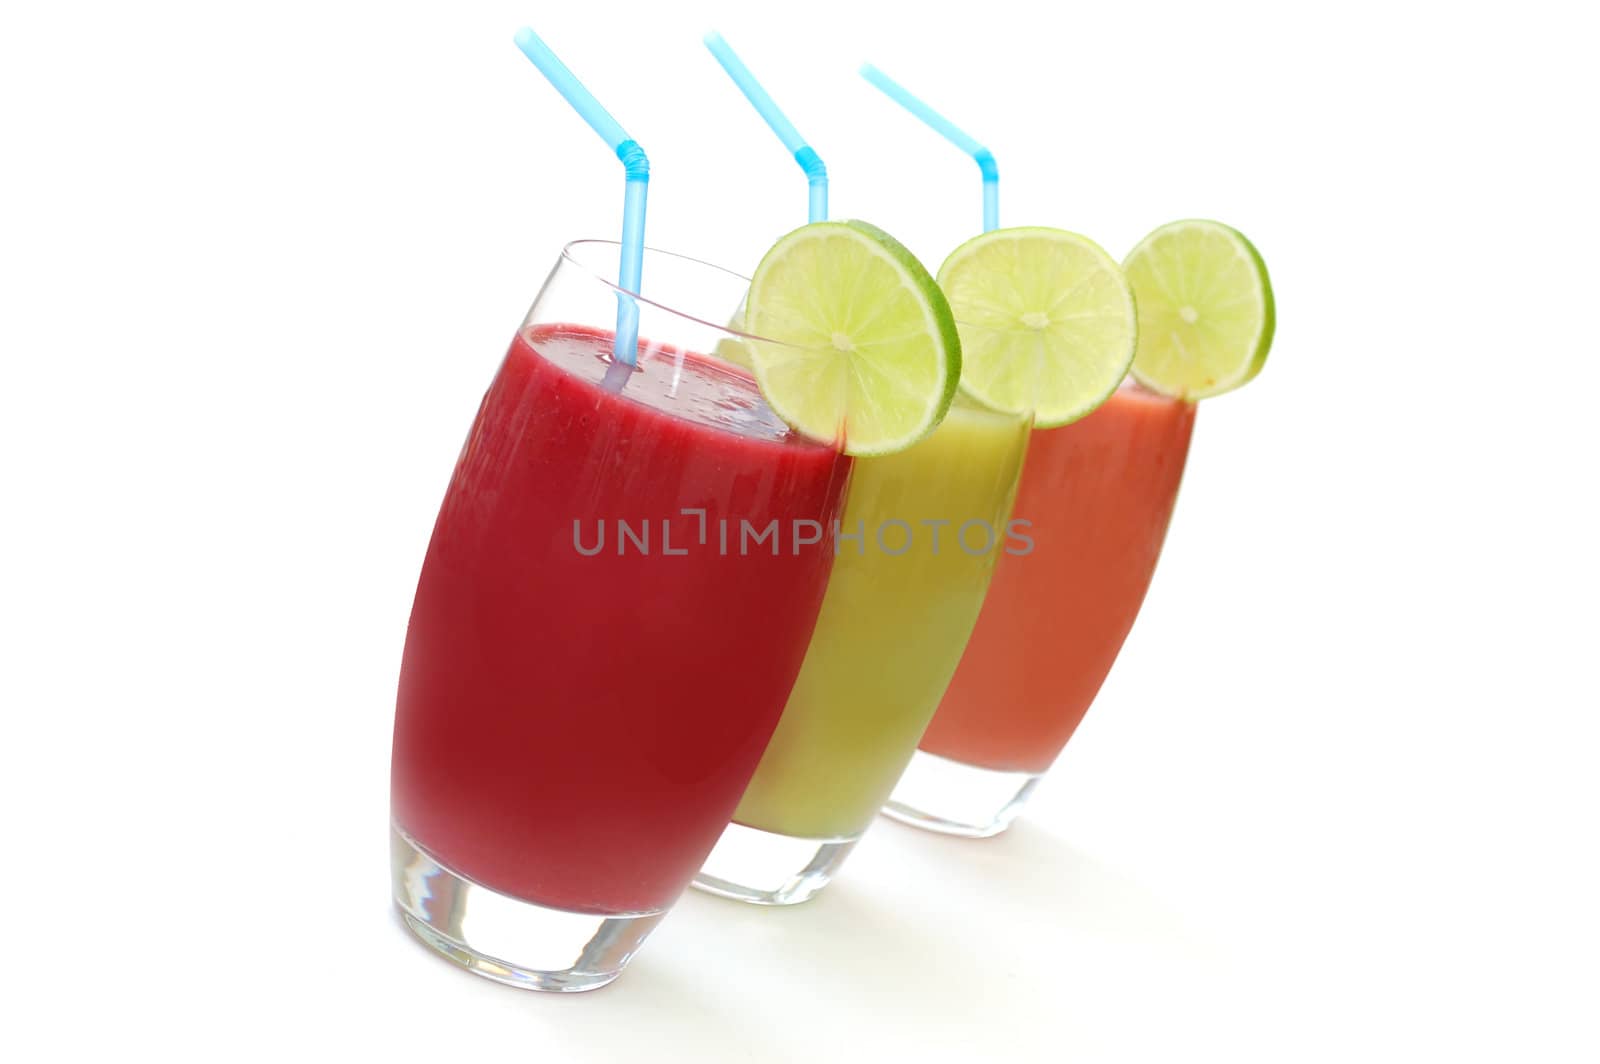 Selection of different refreshing fruit juices